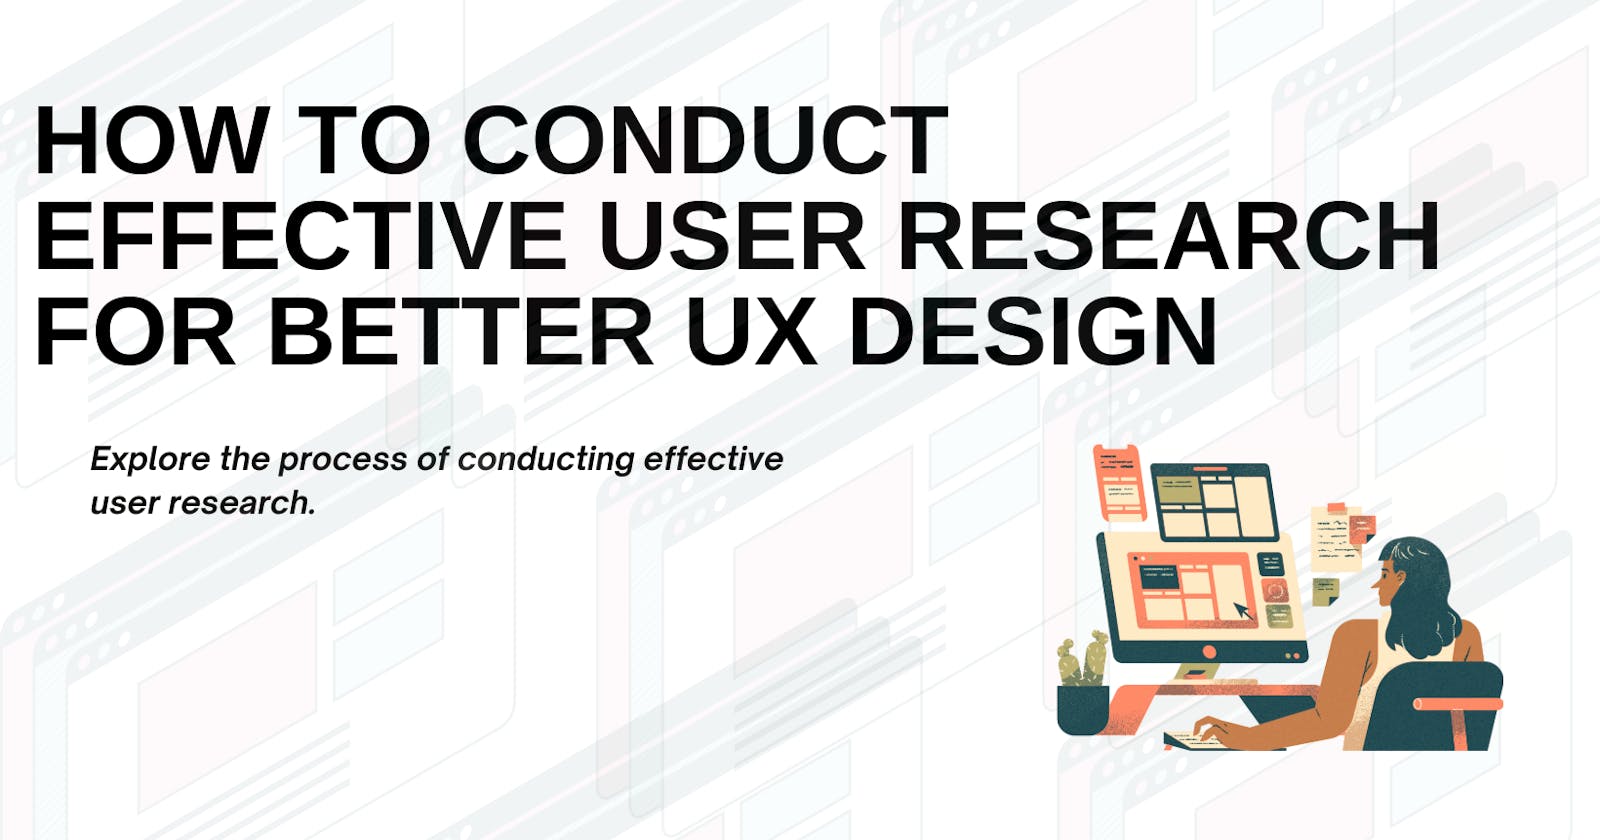 How to Conduct Effective User Research for Better UX Design